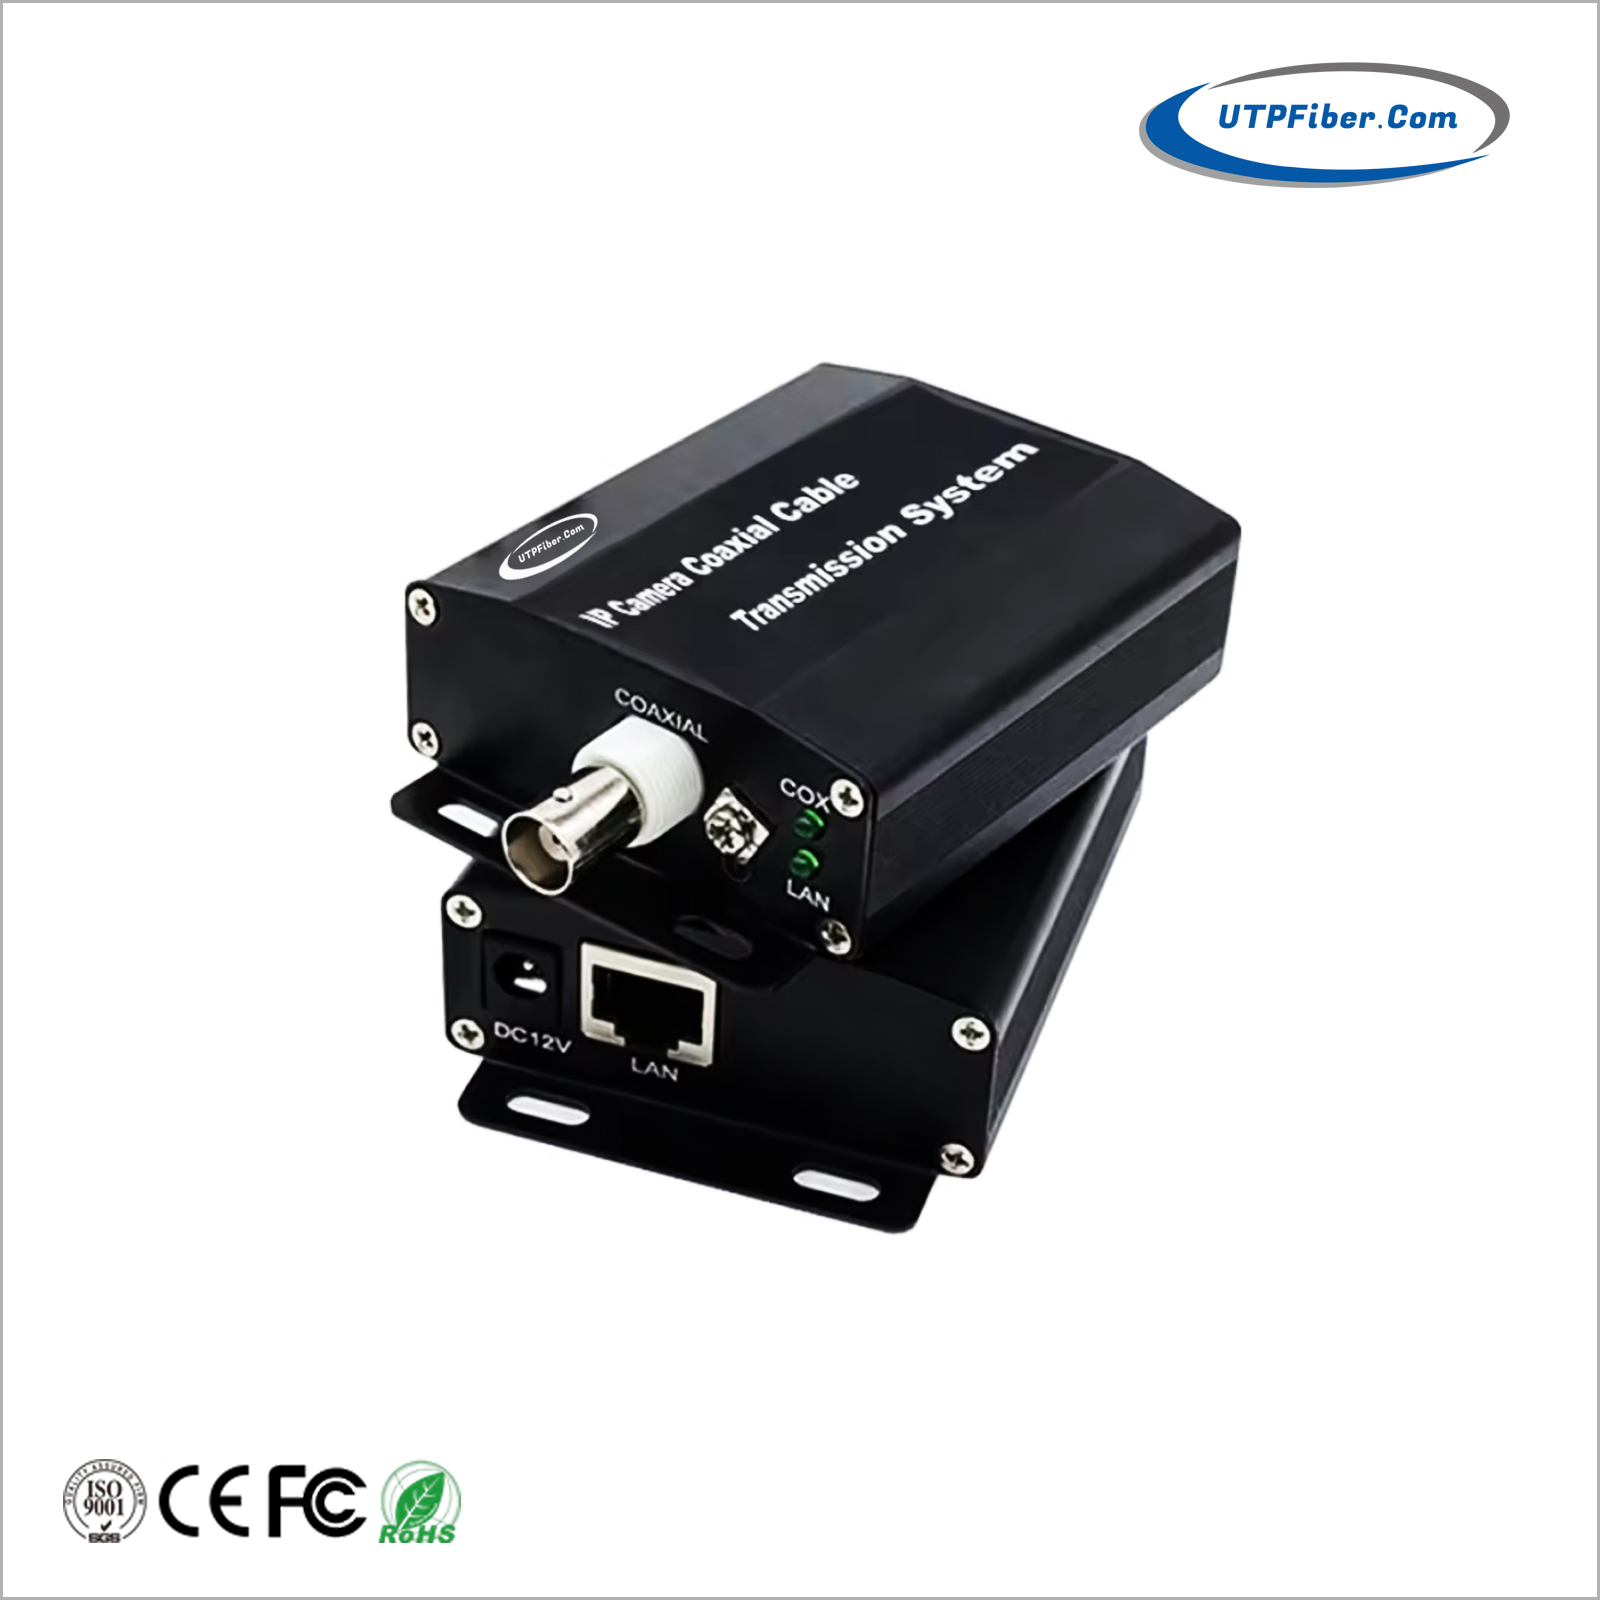 Ethernet Network over BNC Coaxial Cable Converter Adapter